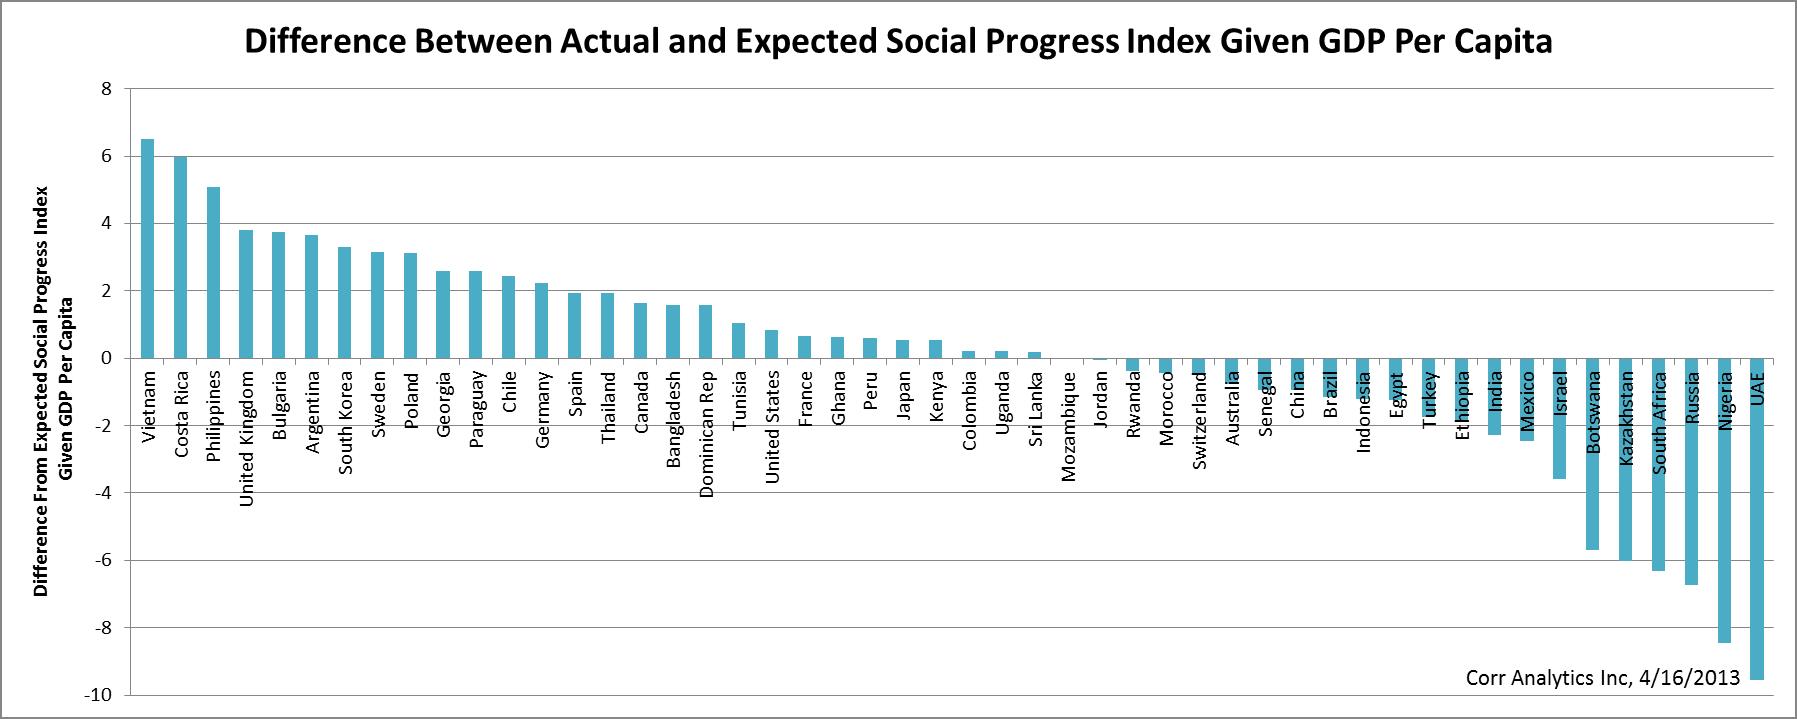 Model 1: Difference Between Actual and Expected Social Progress Index Given GDP Per Capita